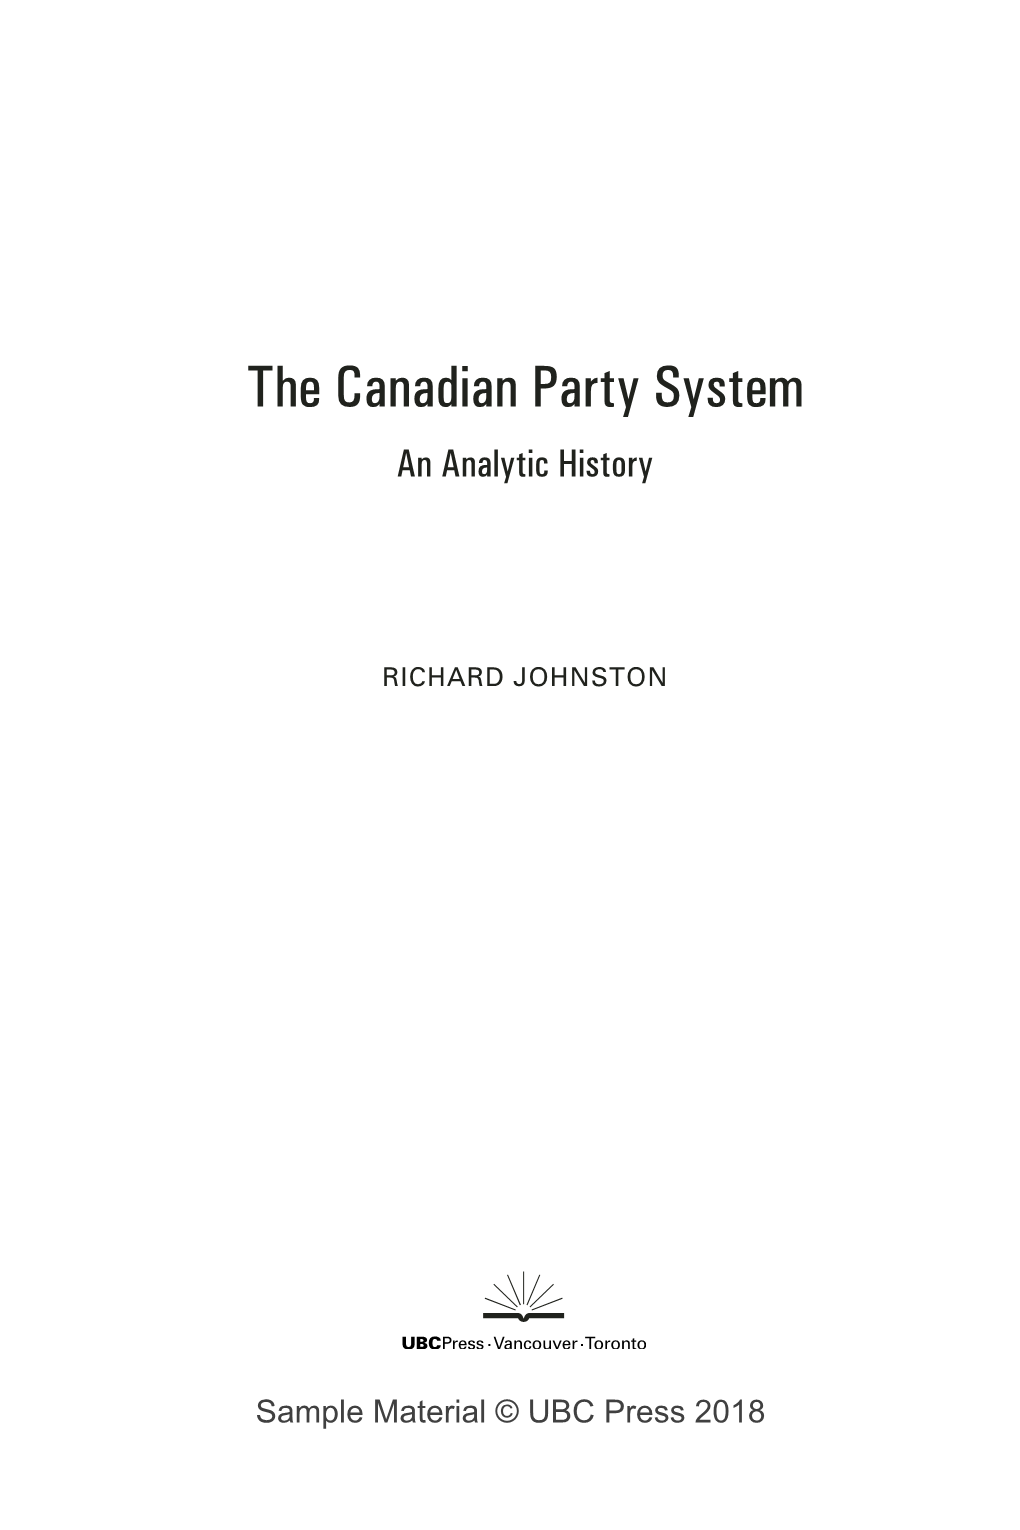 The Canadian Party System an Analytic History